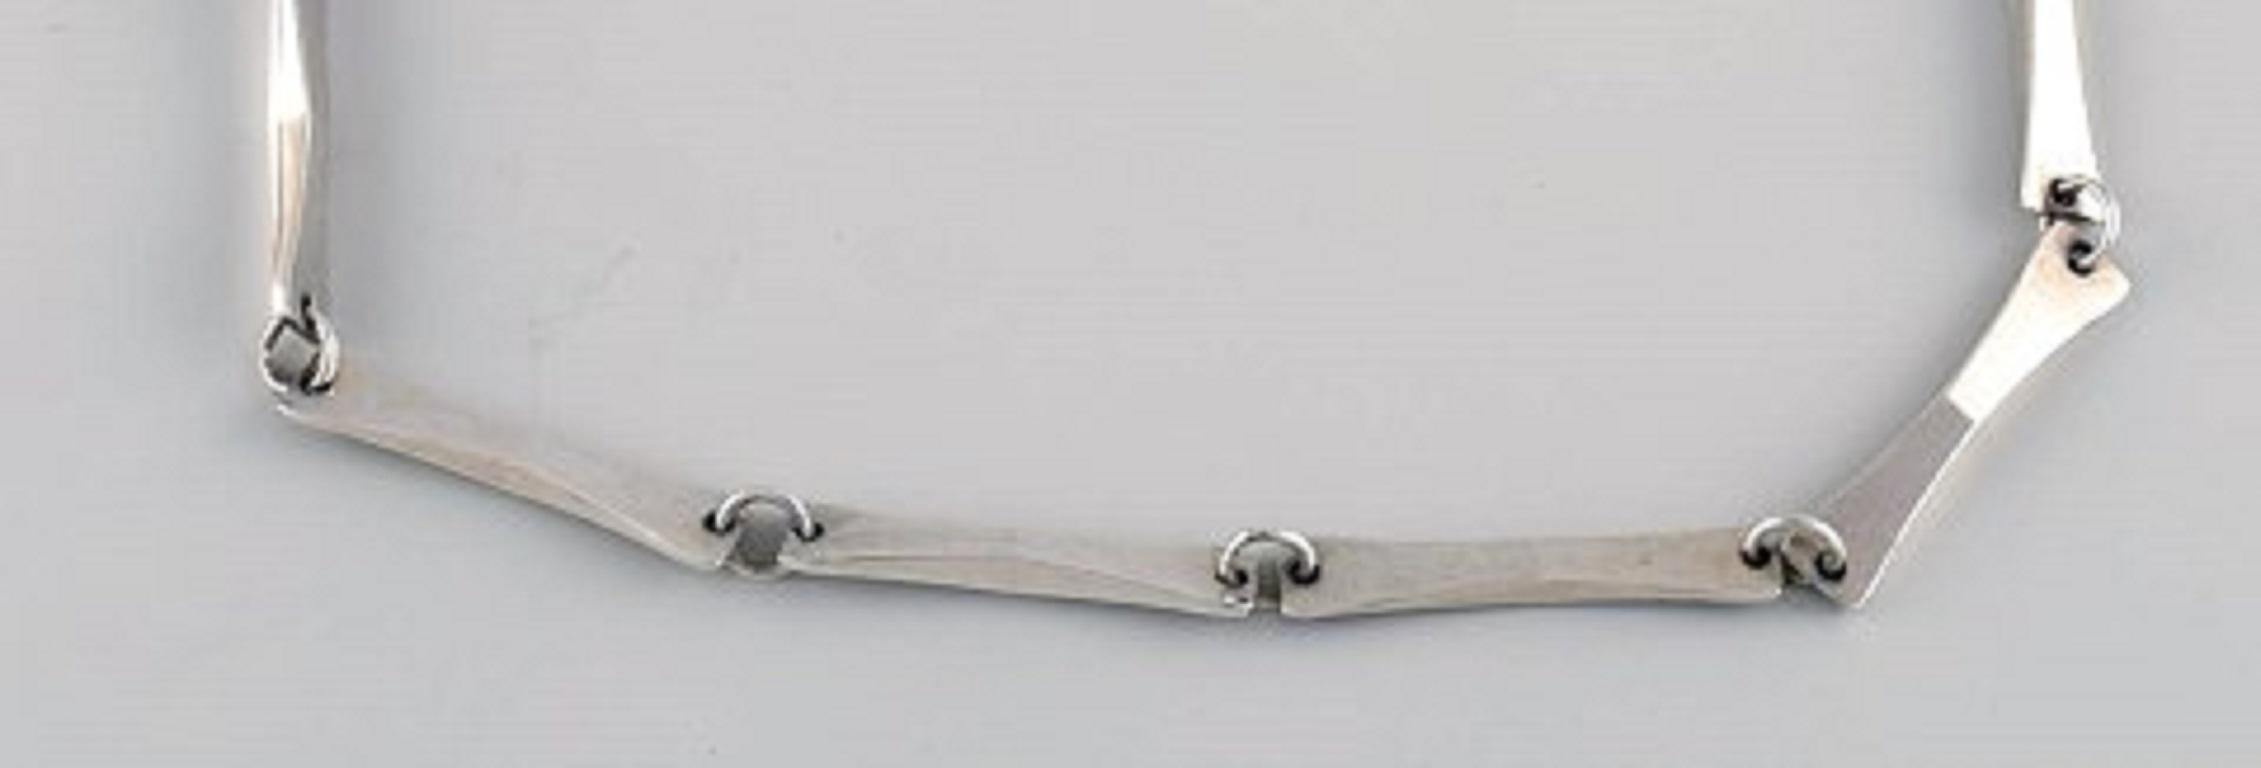 Gertrude Engel for Anton Michelsen. Modernist necklace in sterling silver. Dated 1961.
Full length: 47.5 cm.
Width: 7 mm.
Stamped.
In excellent condition.